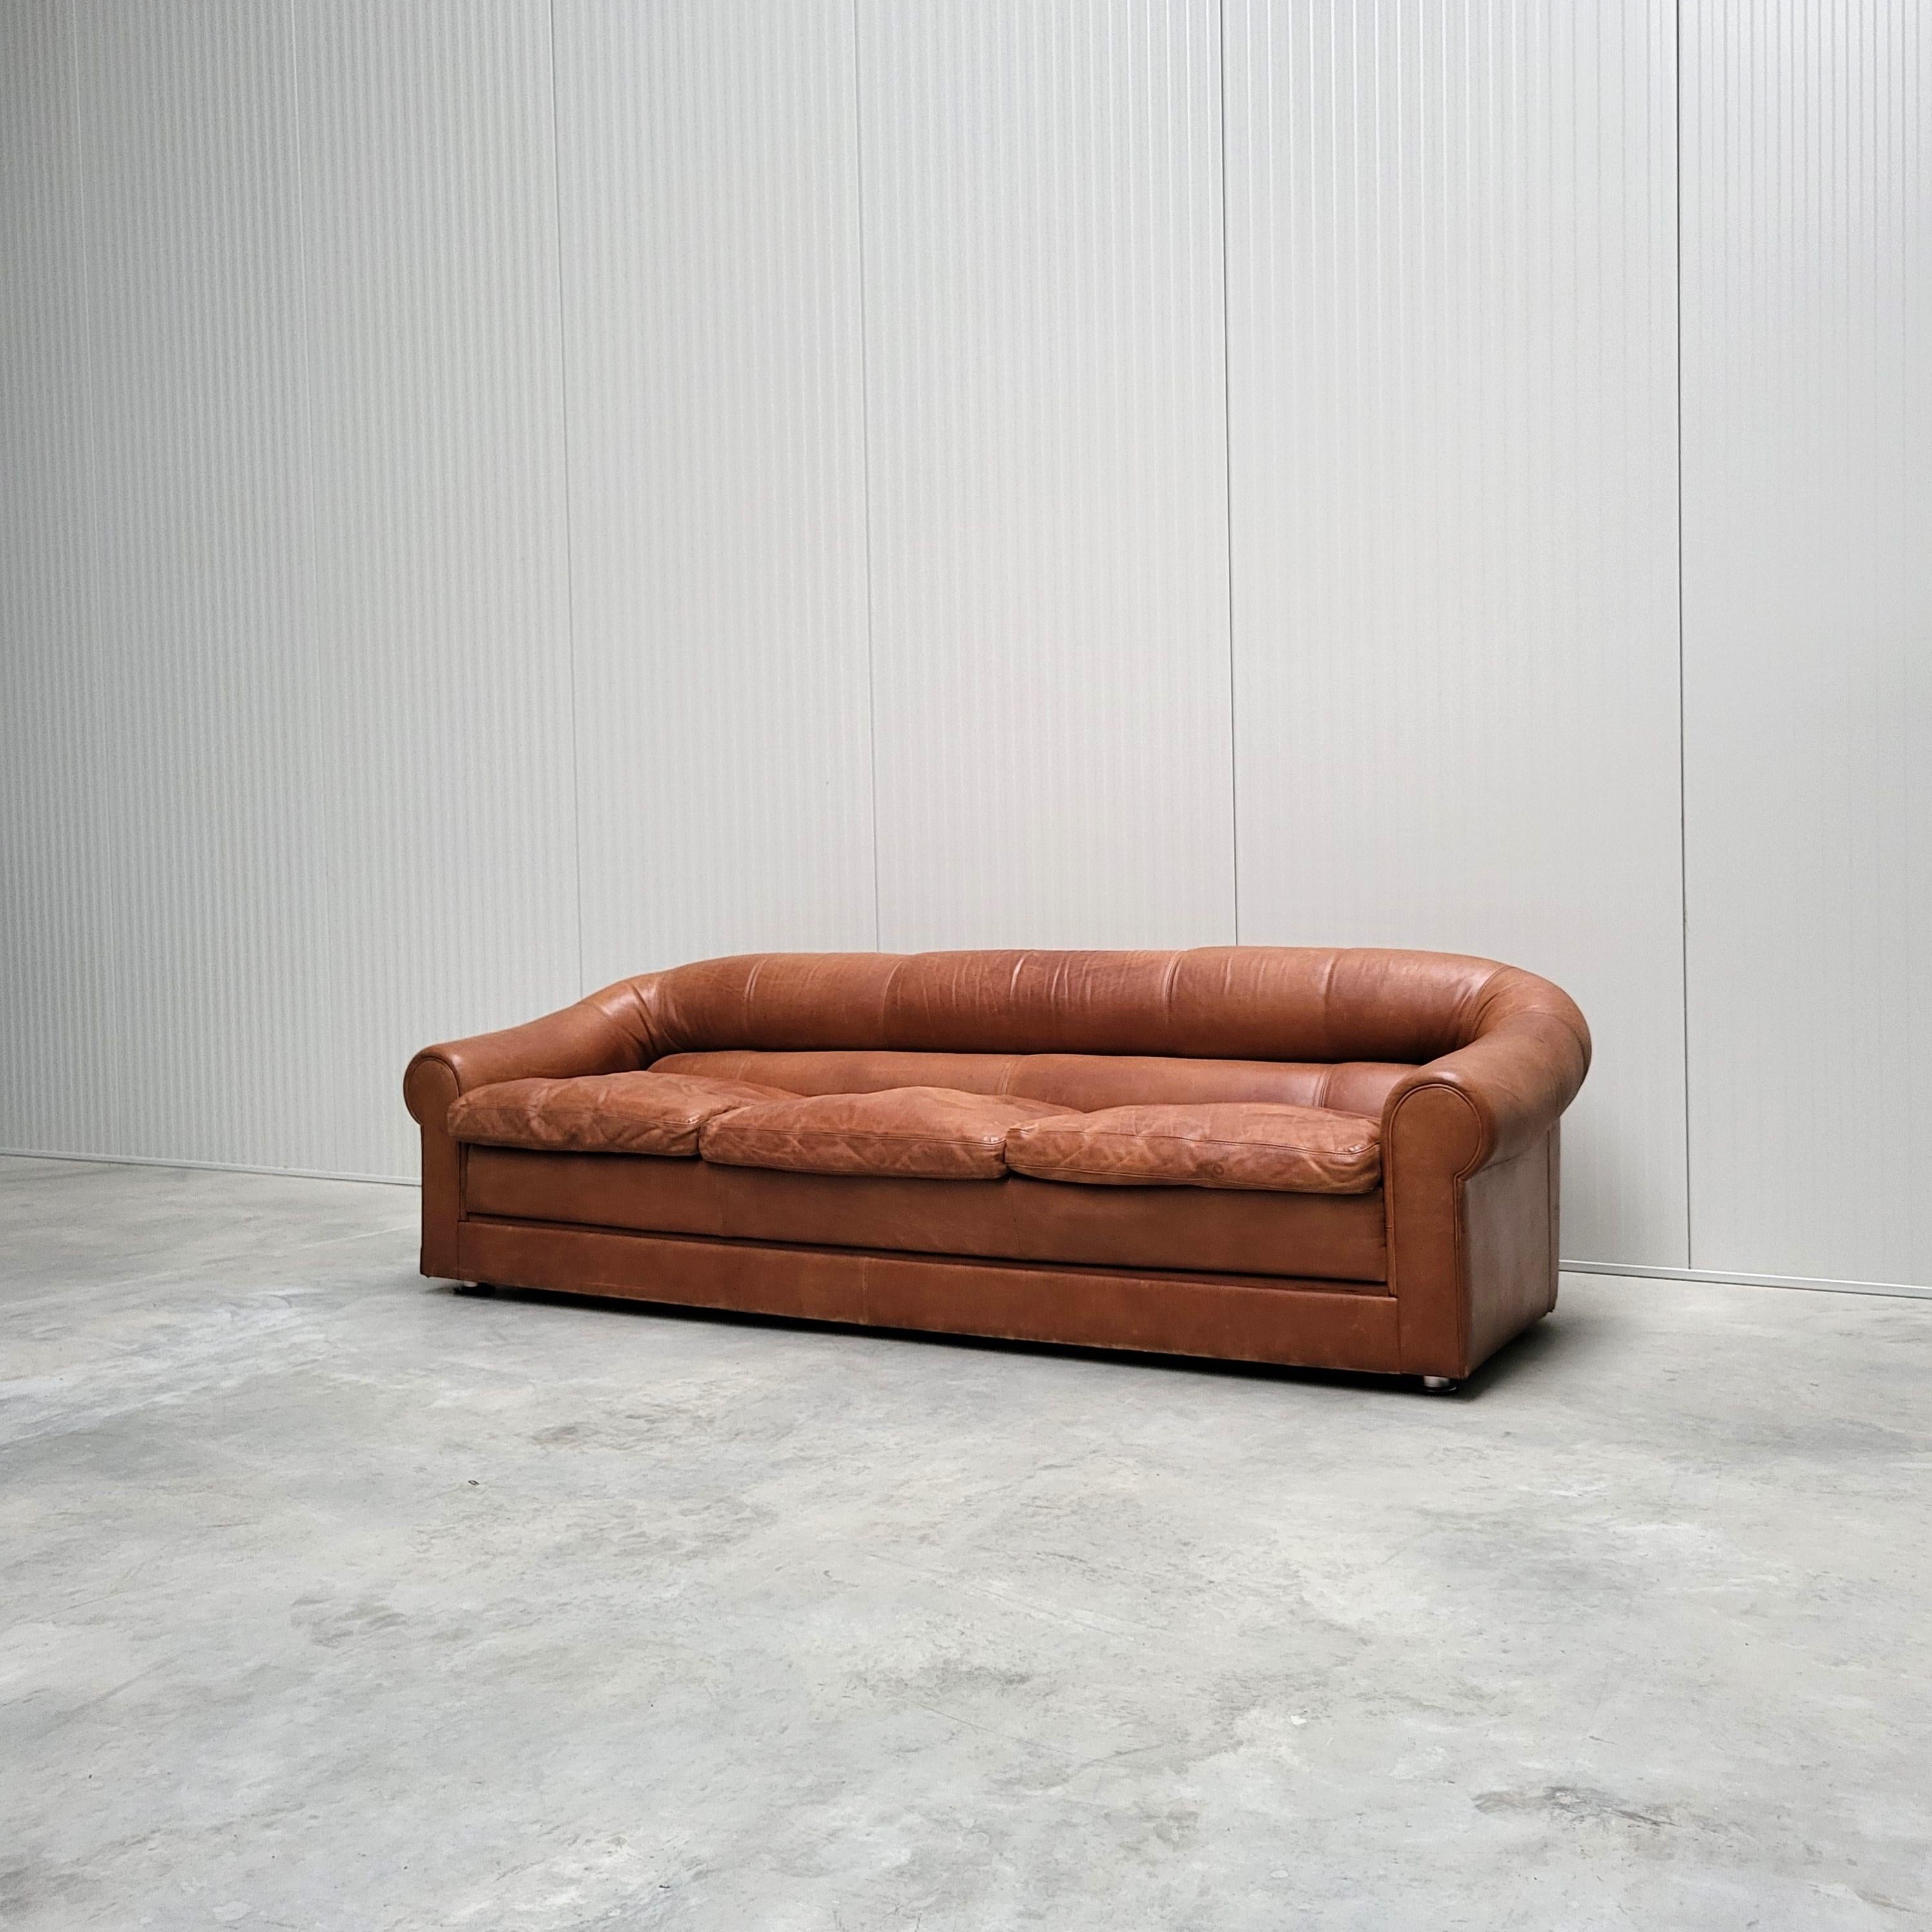 This timeless iconic sofa was made in the 1970s in Italy in the manner of Poltrona Frau or De Sede. 

The sofa is upholstered in an amazing super smooth Mid Brown leather. 
The cushions are filled with duck feathers.

Overall the piece is in a very